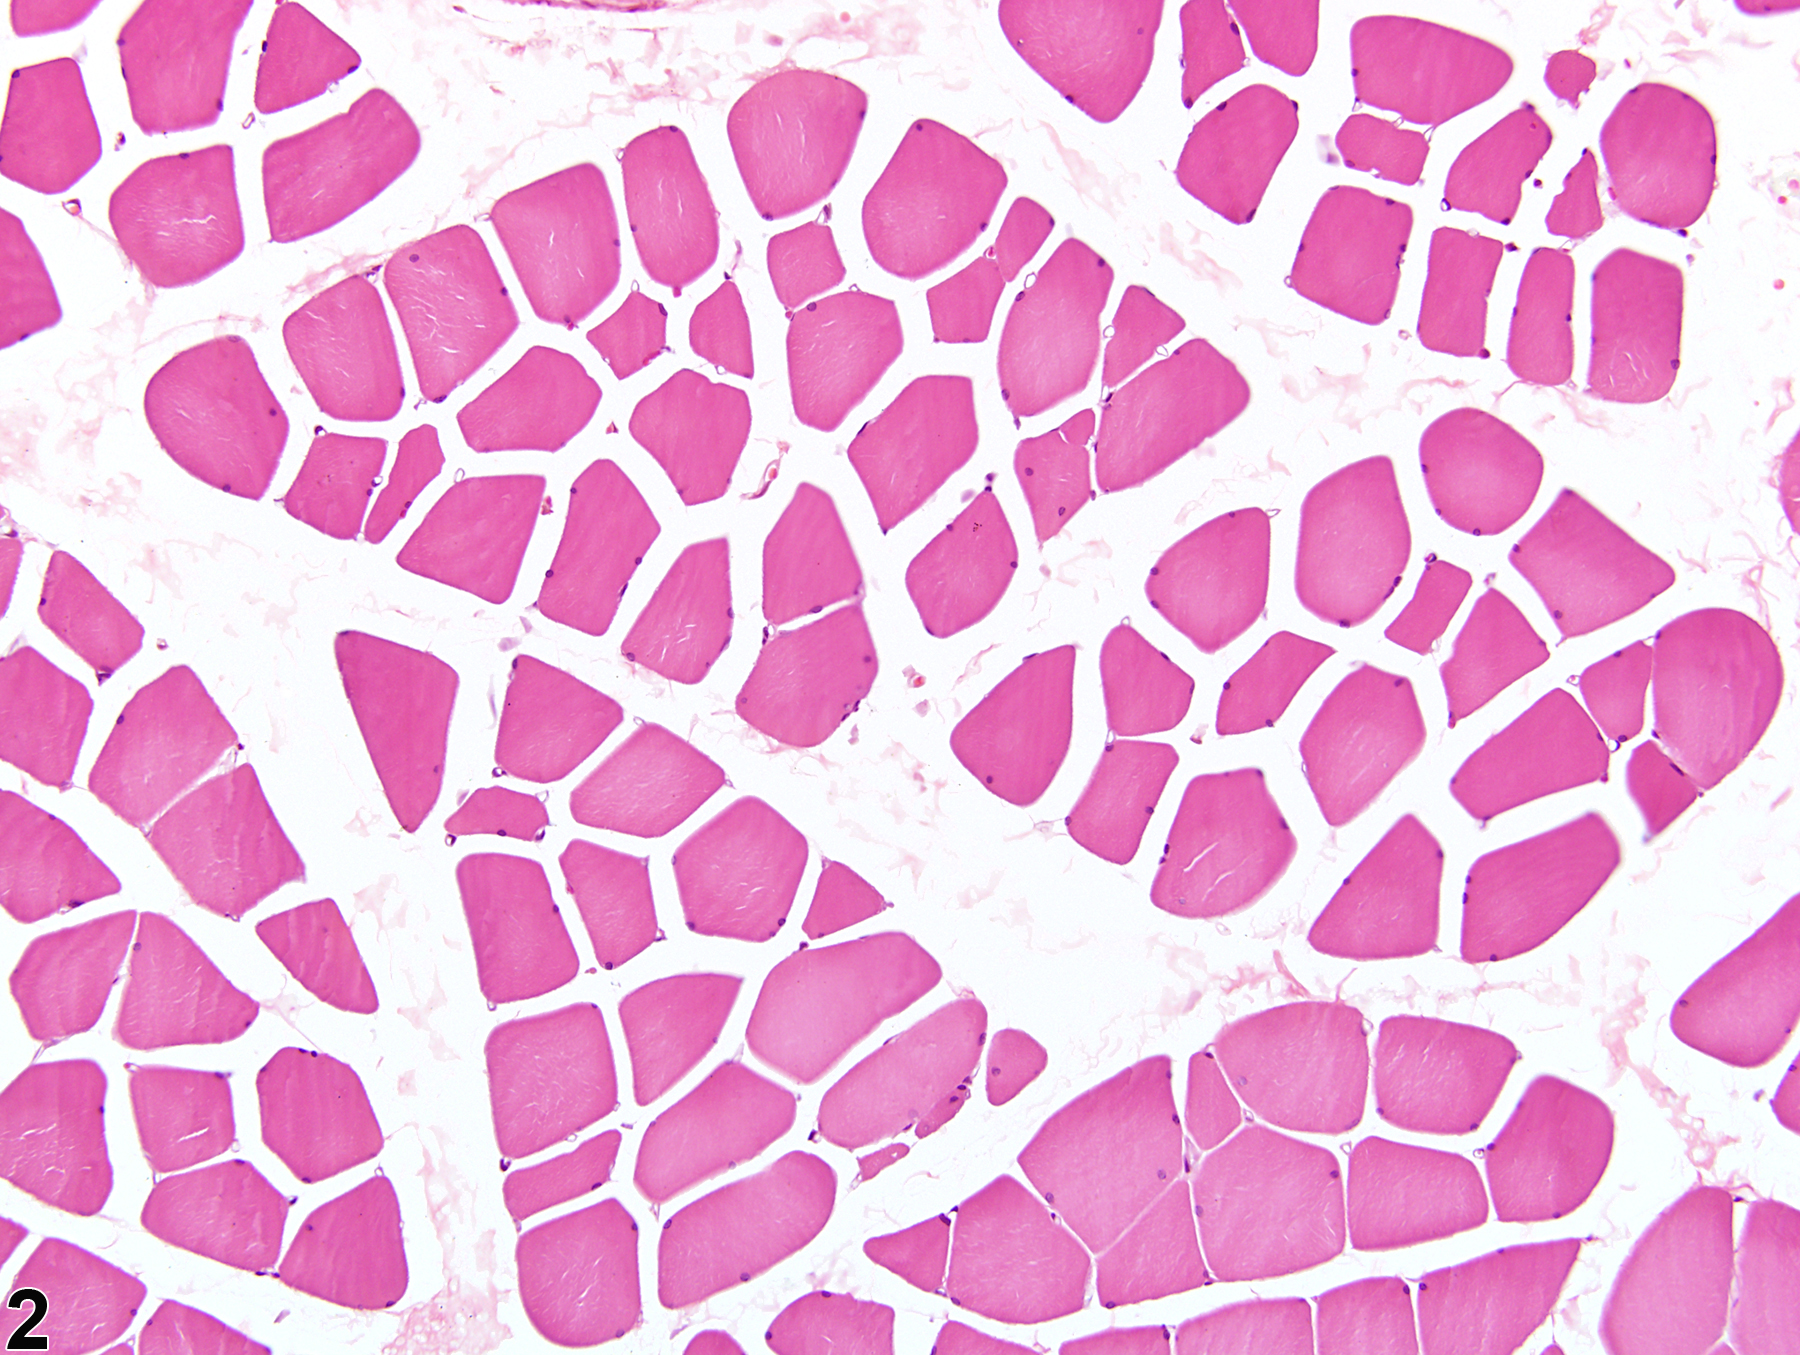 Image of edema in the skeletal muscle from a male F344/N rat in a chronic study